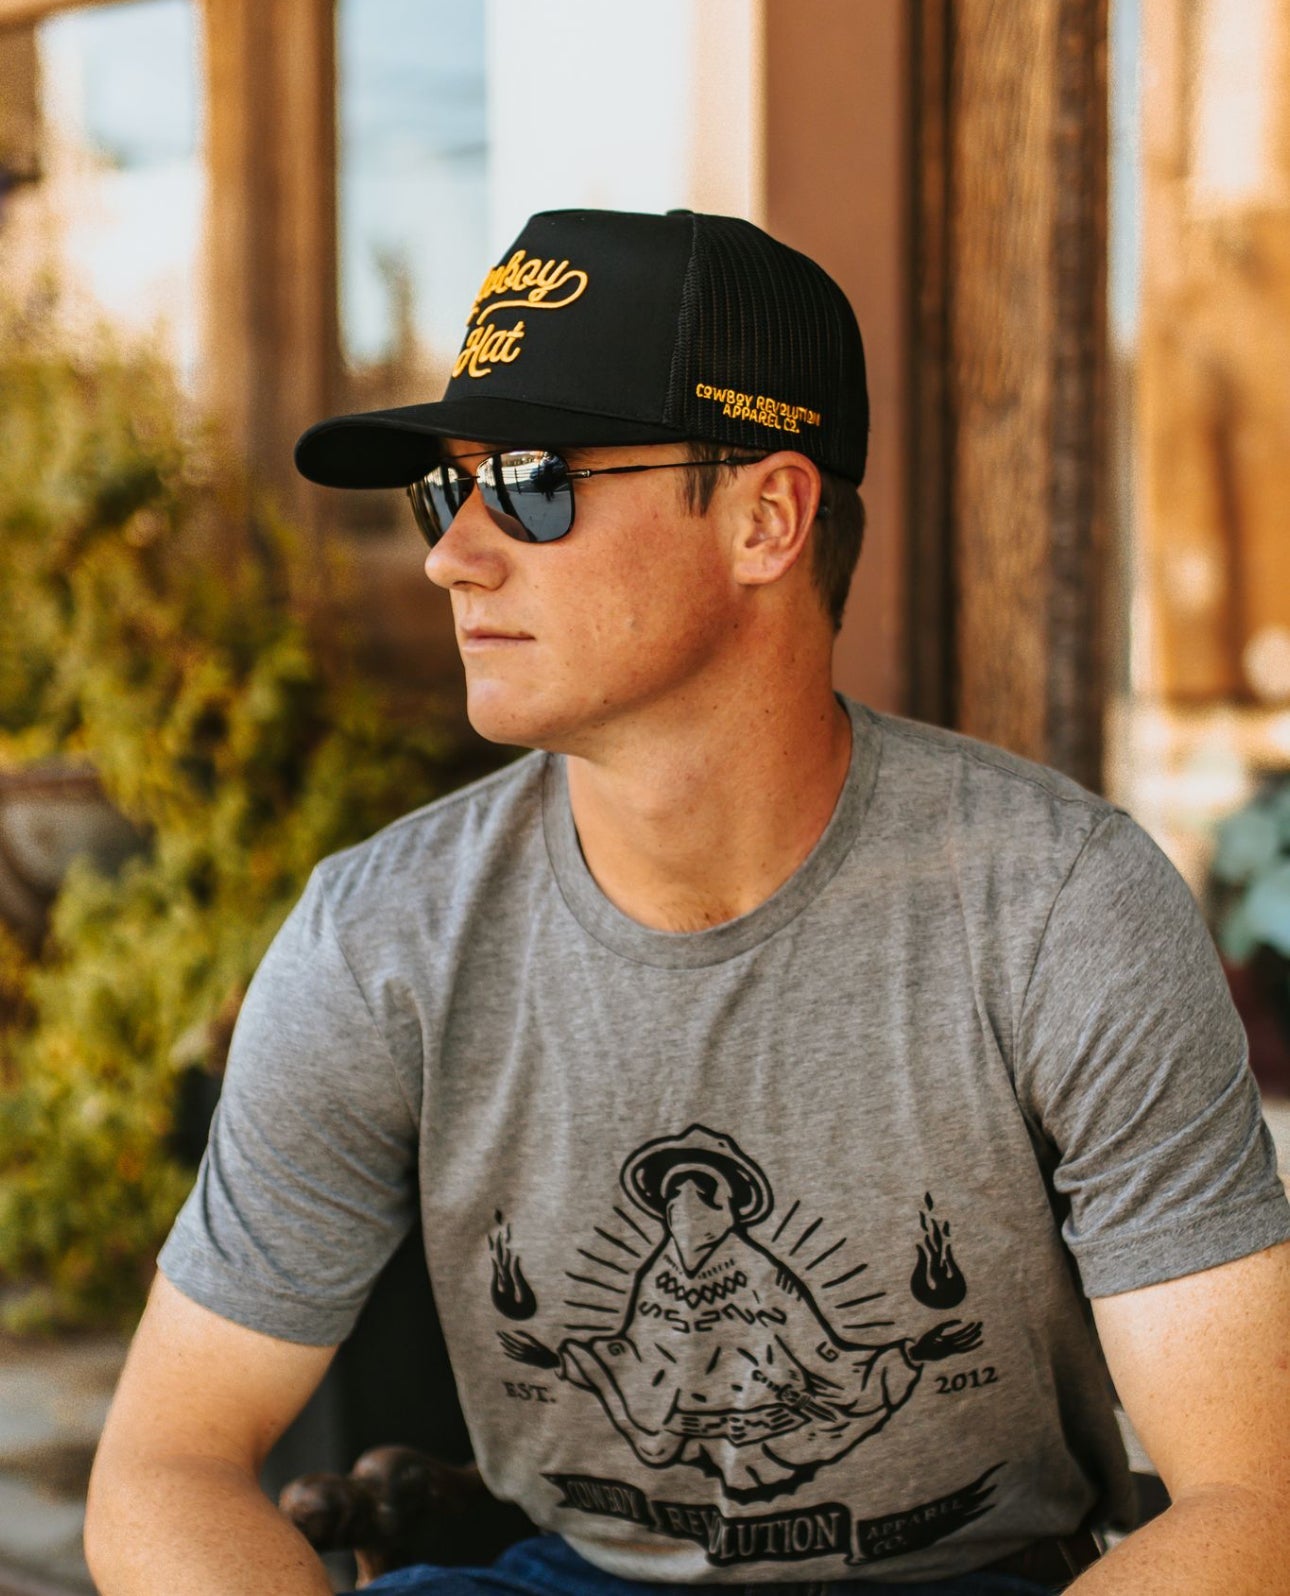 Duck Camo Cowboy Revolution 5-panel Trucker Hat: Western Style with  Southern Flair– Cowboy Revolution Apparel Co.